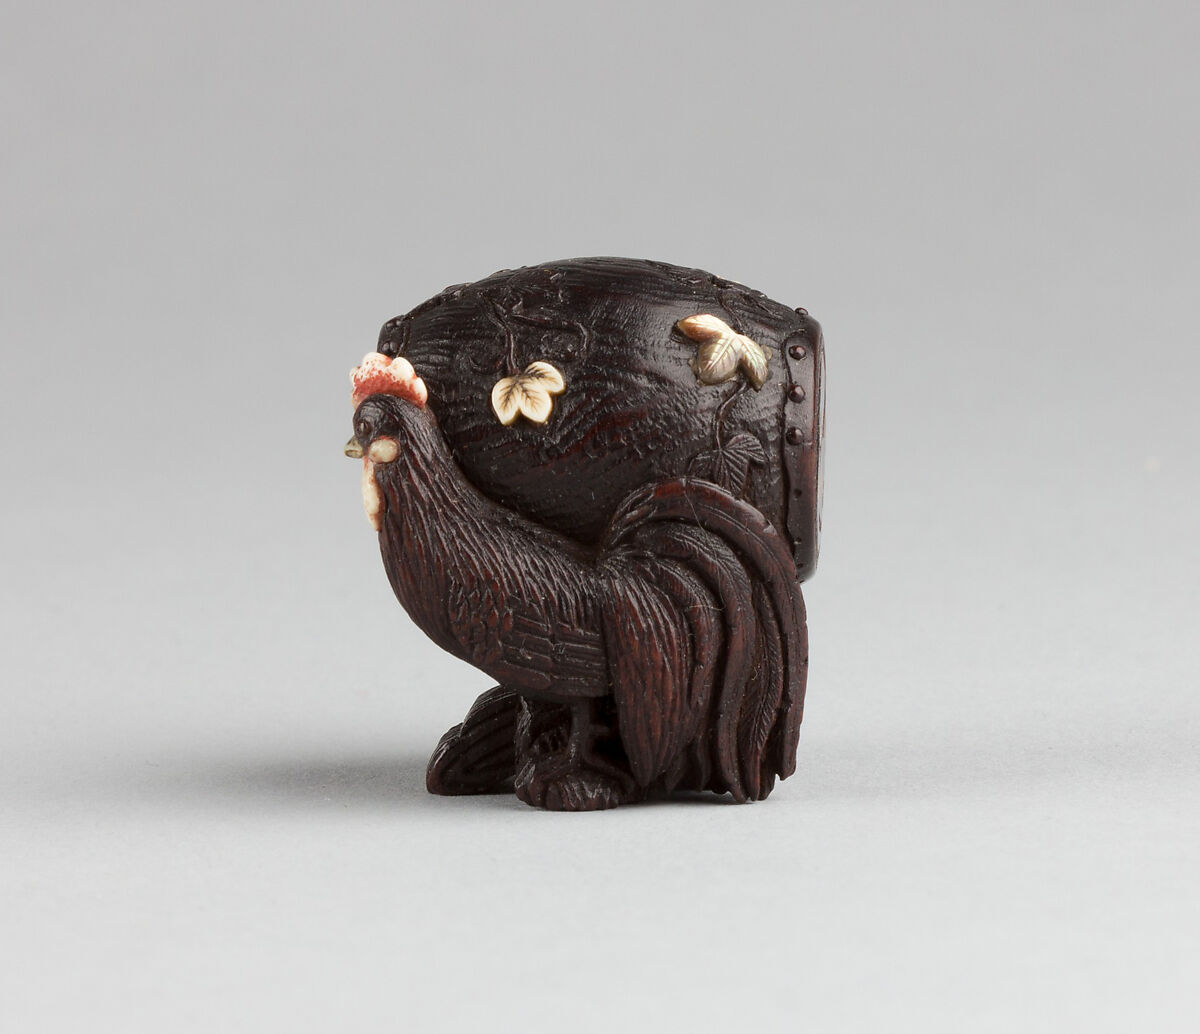 Netsuke, Wood inlaid with ivory and mother-of-pearl, Japan 